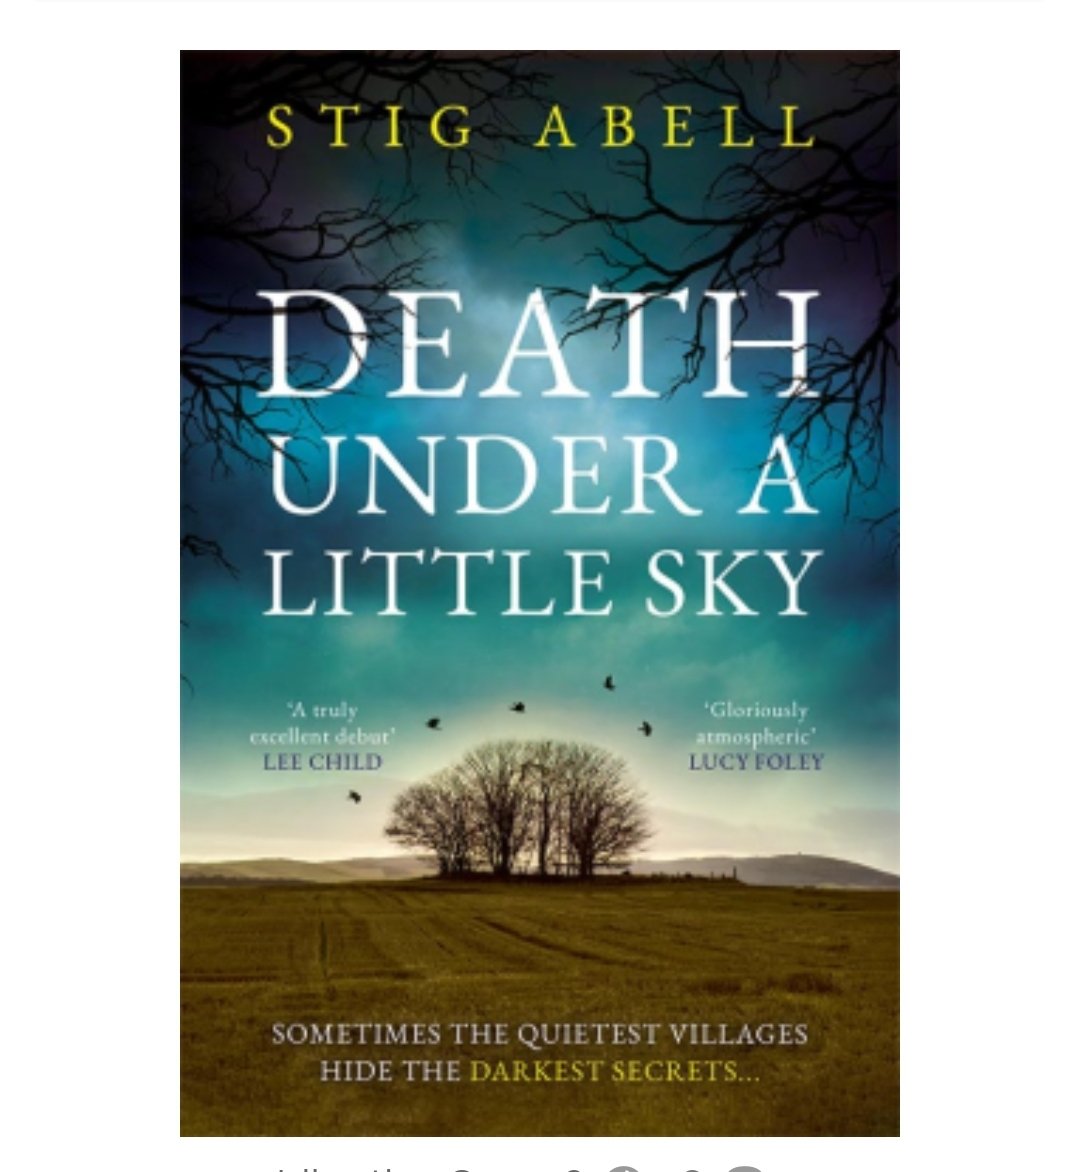 Huge thanks to @HarperCollins @HarperFiction for the invitation to read Stig Abell's new novel ahead of publication #DeathUnderALittleSky